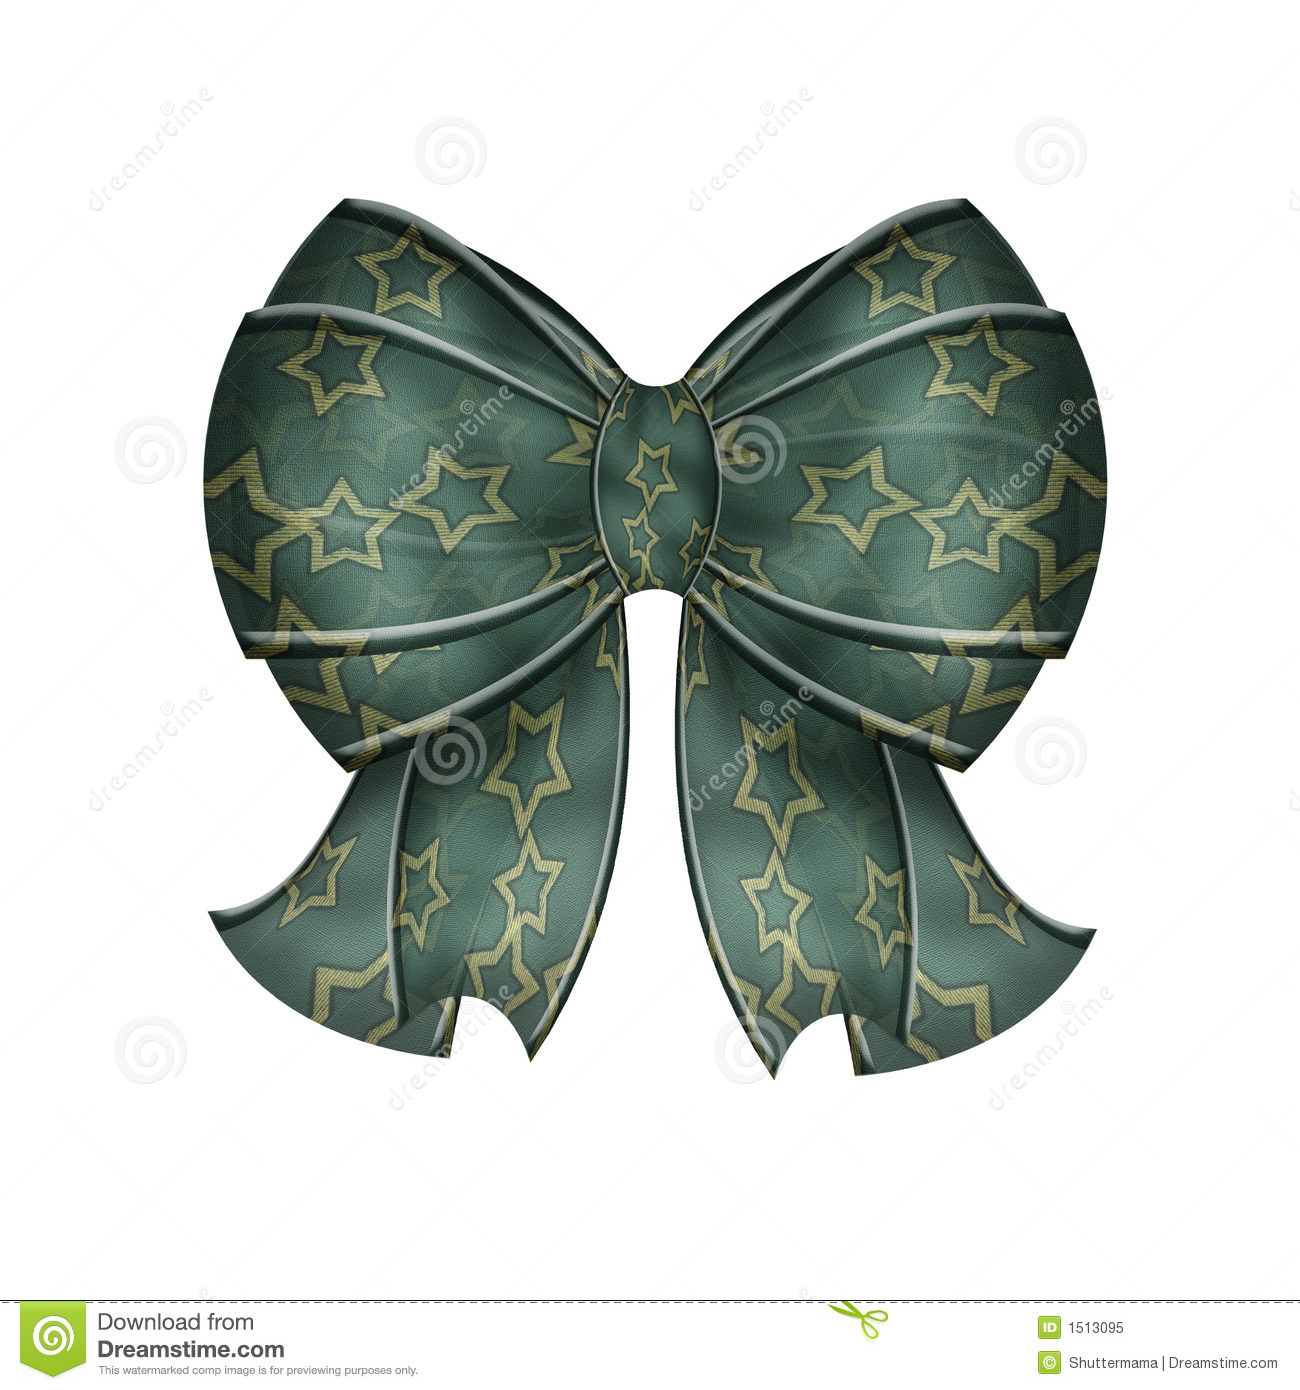 Fancy Blue Green Bow With Stars Royalty Free Stock Photo   Image